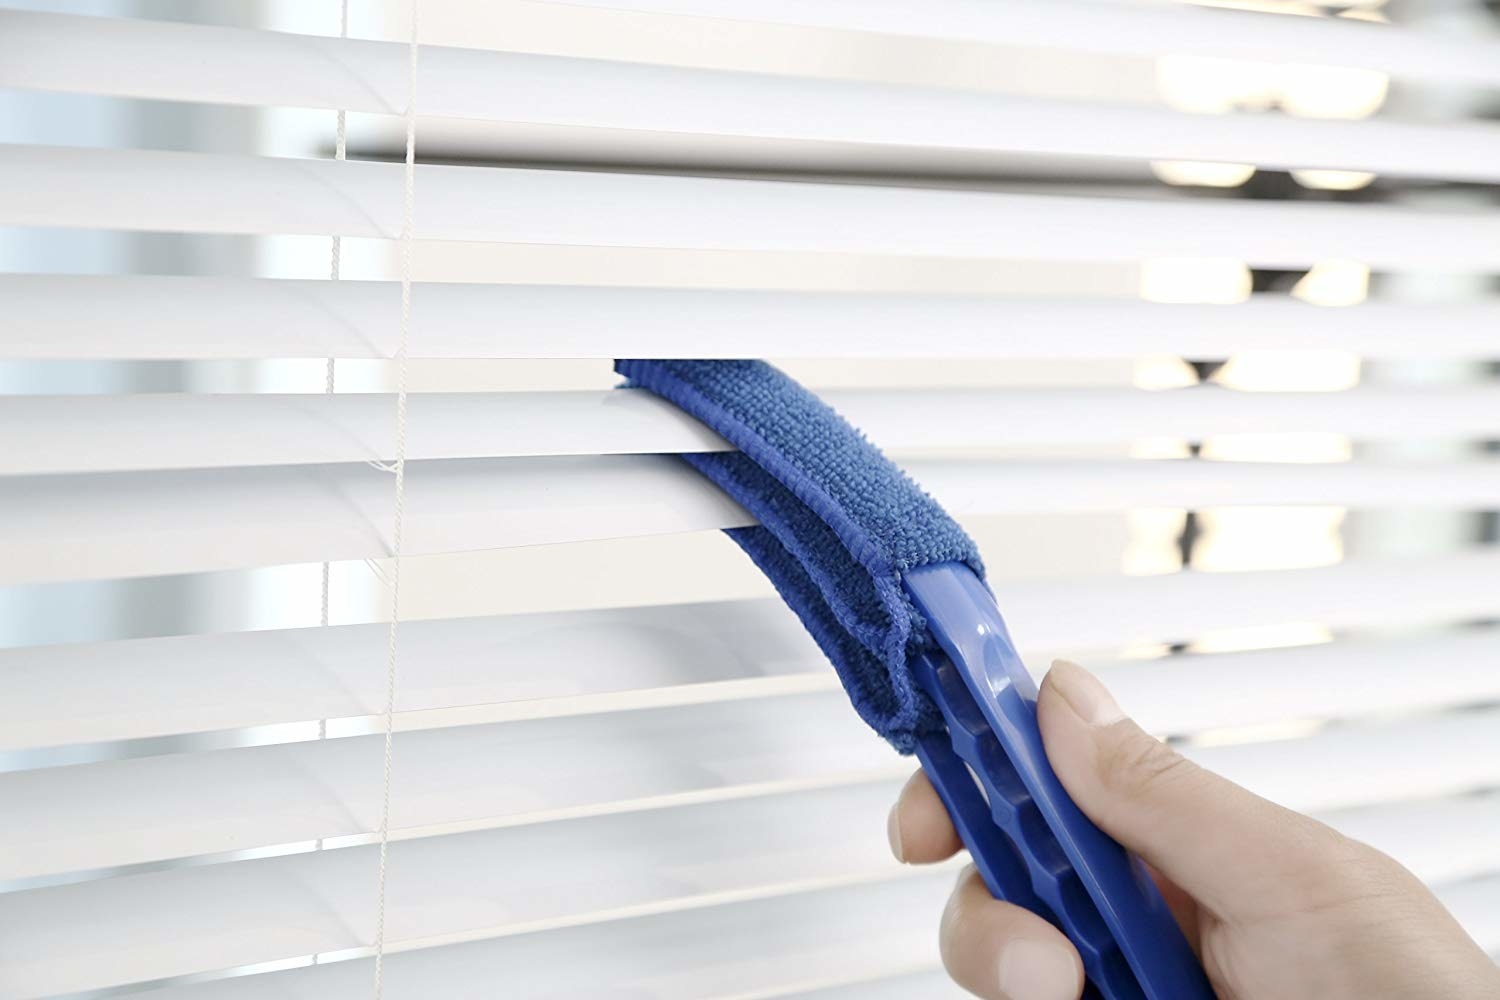 The wand cleaning four surfaces of Venetian blinds at once